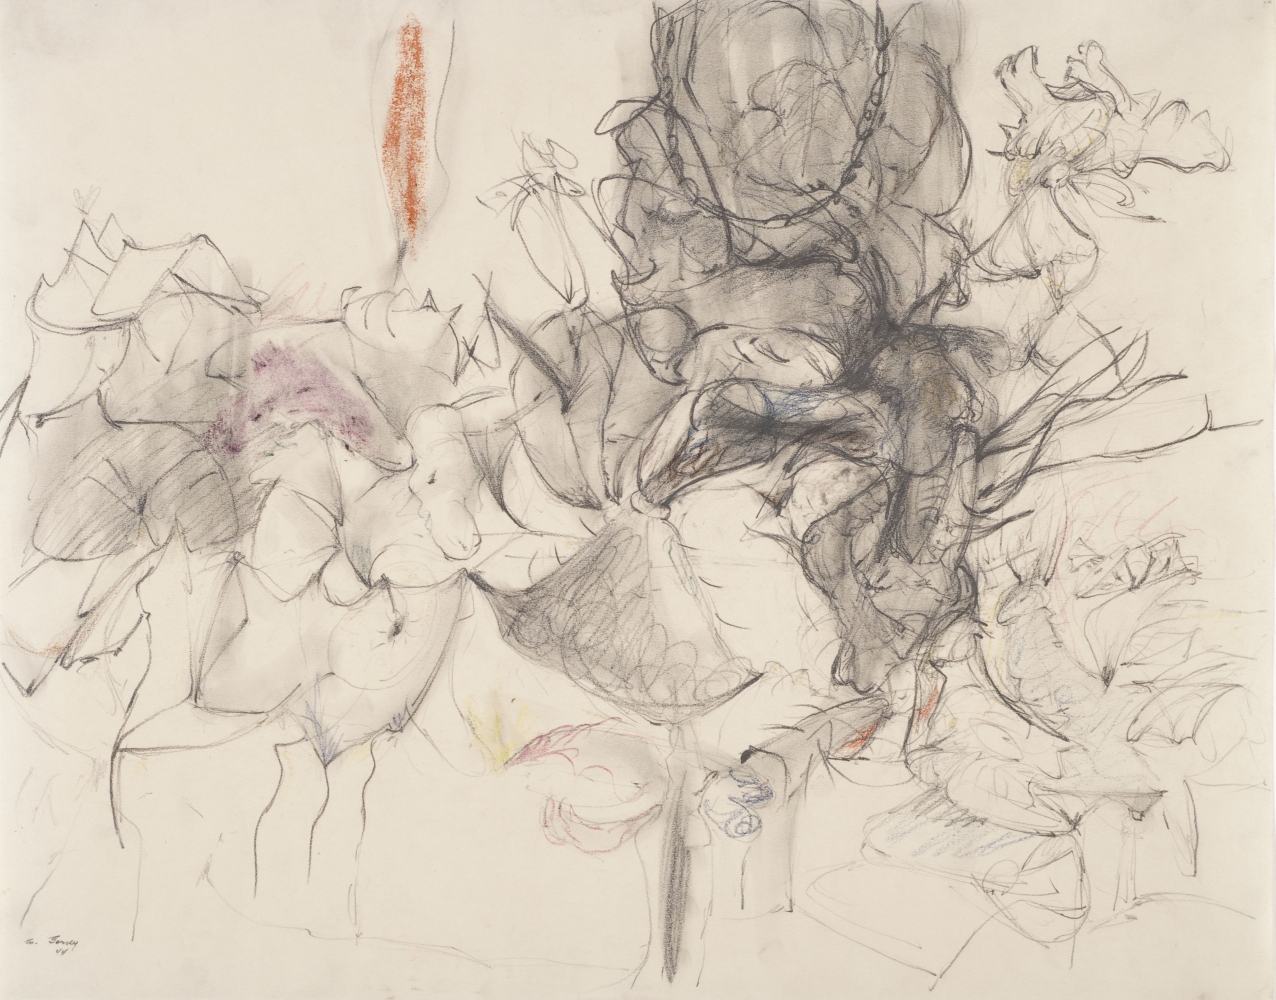 Untitled, 1944, graphite pencil and crayon on paper, 19 x 24 in. (48.3 x 61 cm). The Menil Collection, Houston, Anonymous gift in memory of Marion Barthelme, 2011-042. Photo: Paul Hester; The Menil Collection, Houston.&nbsp;[AGCR: D1117]